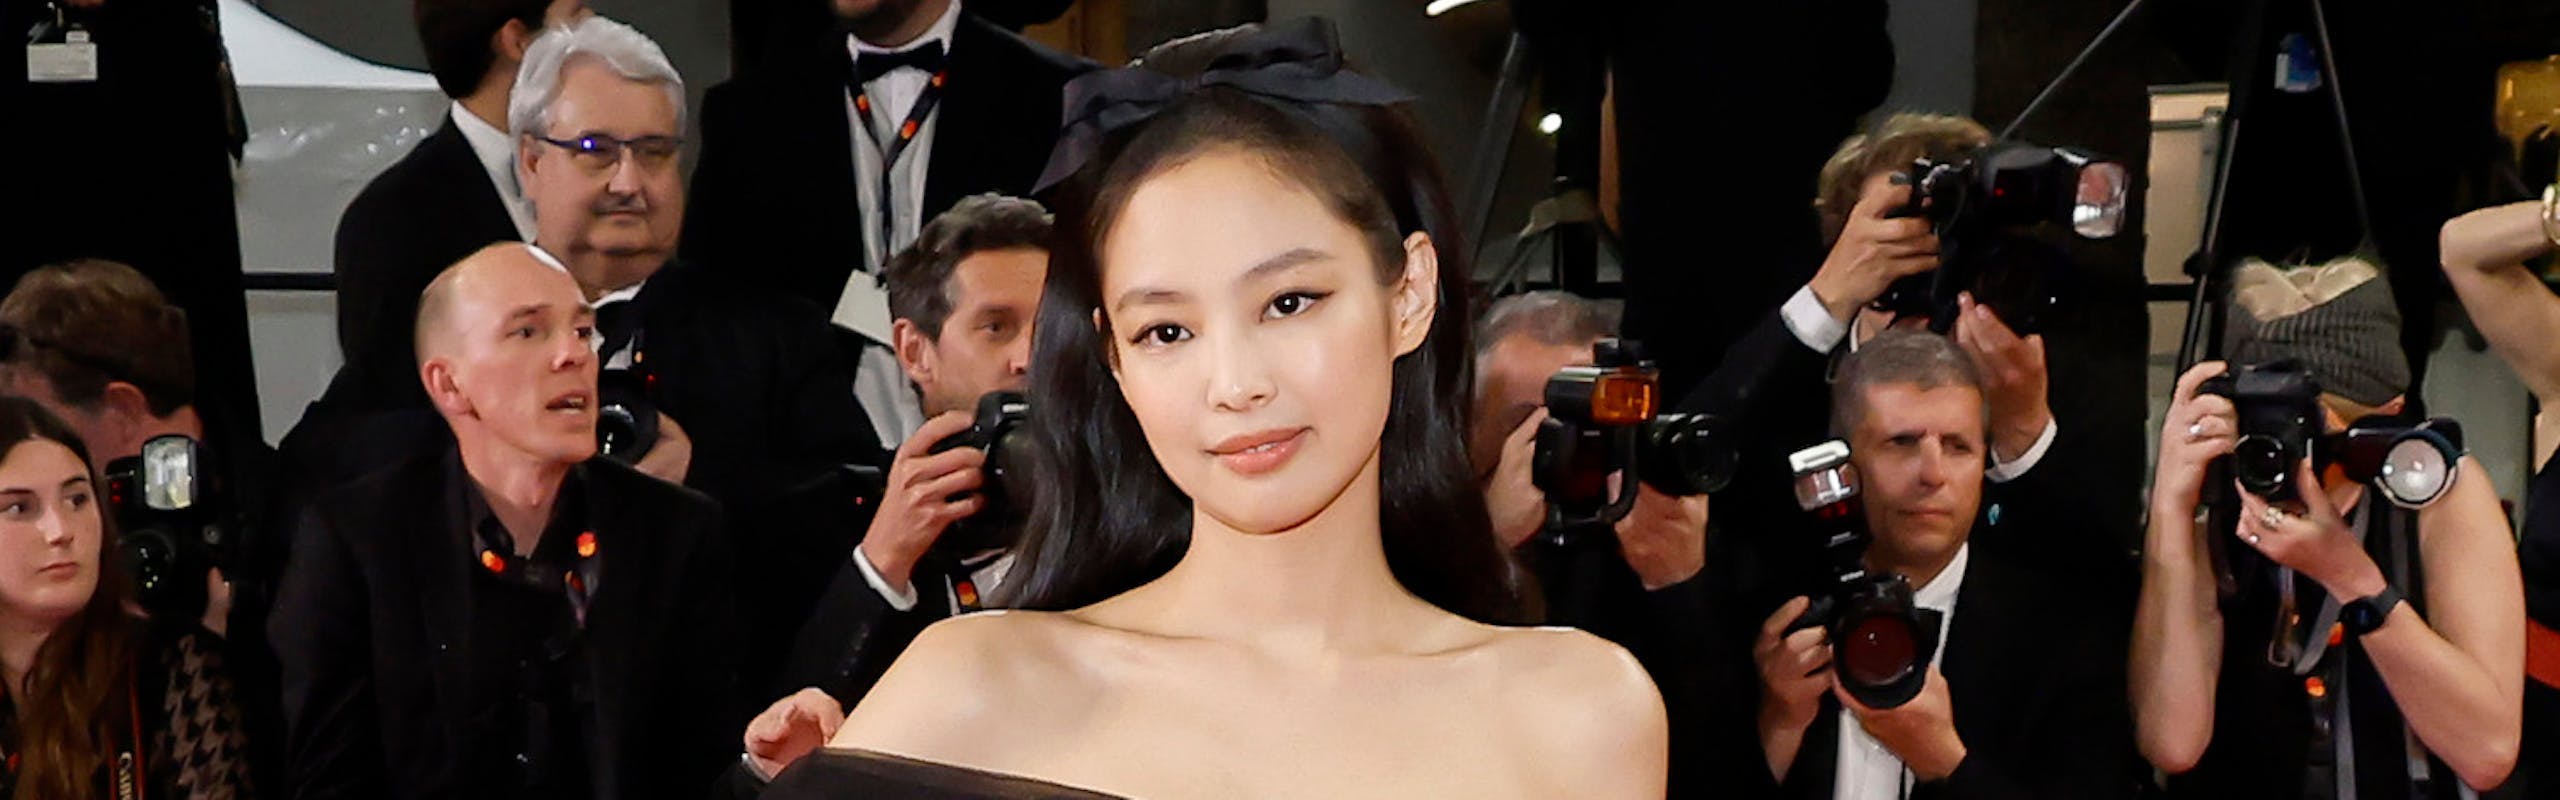 Jennie in a white and black dress at Cannes.